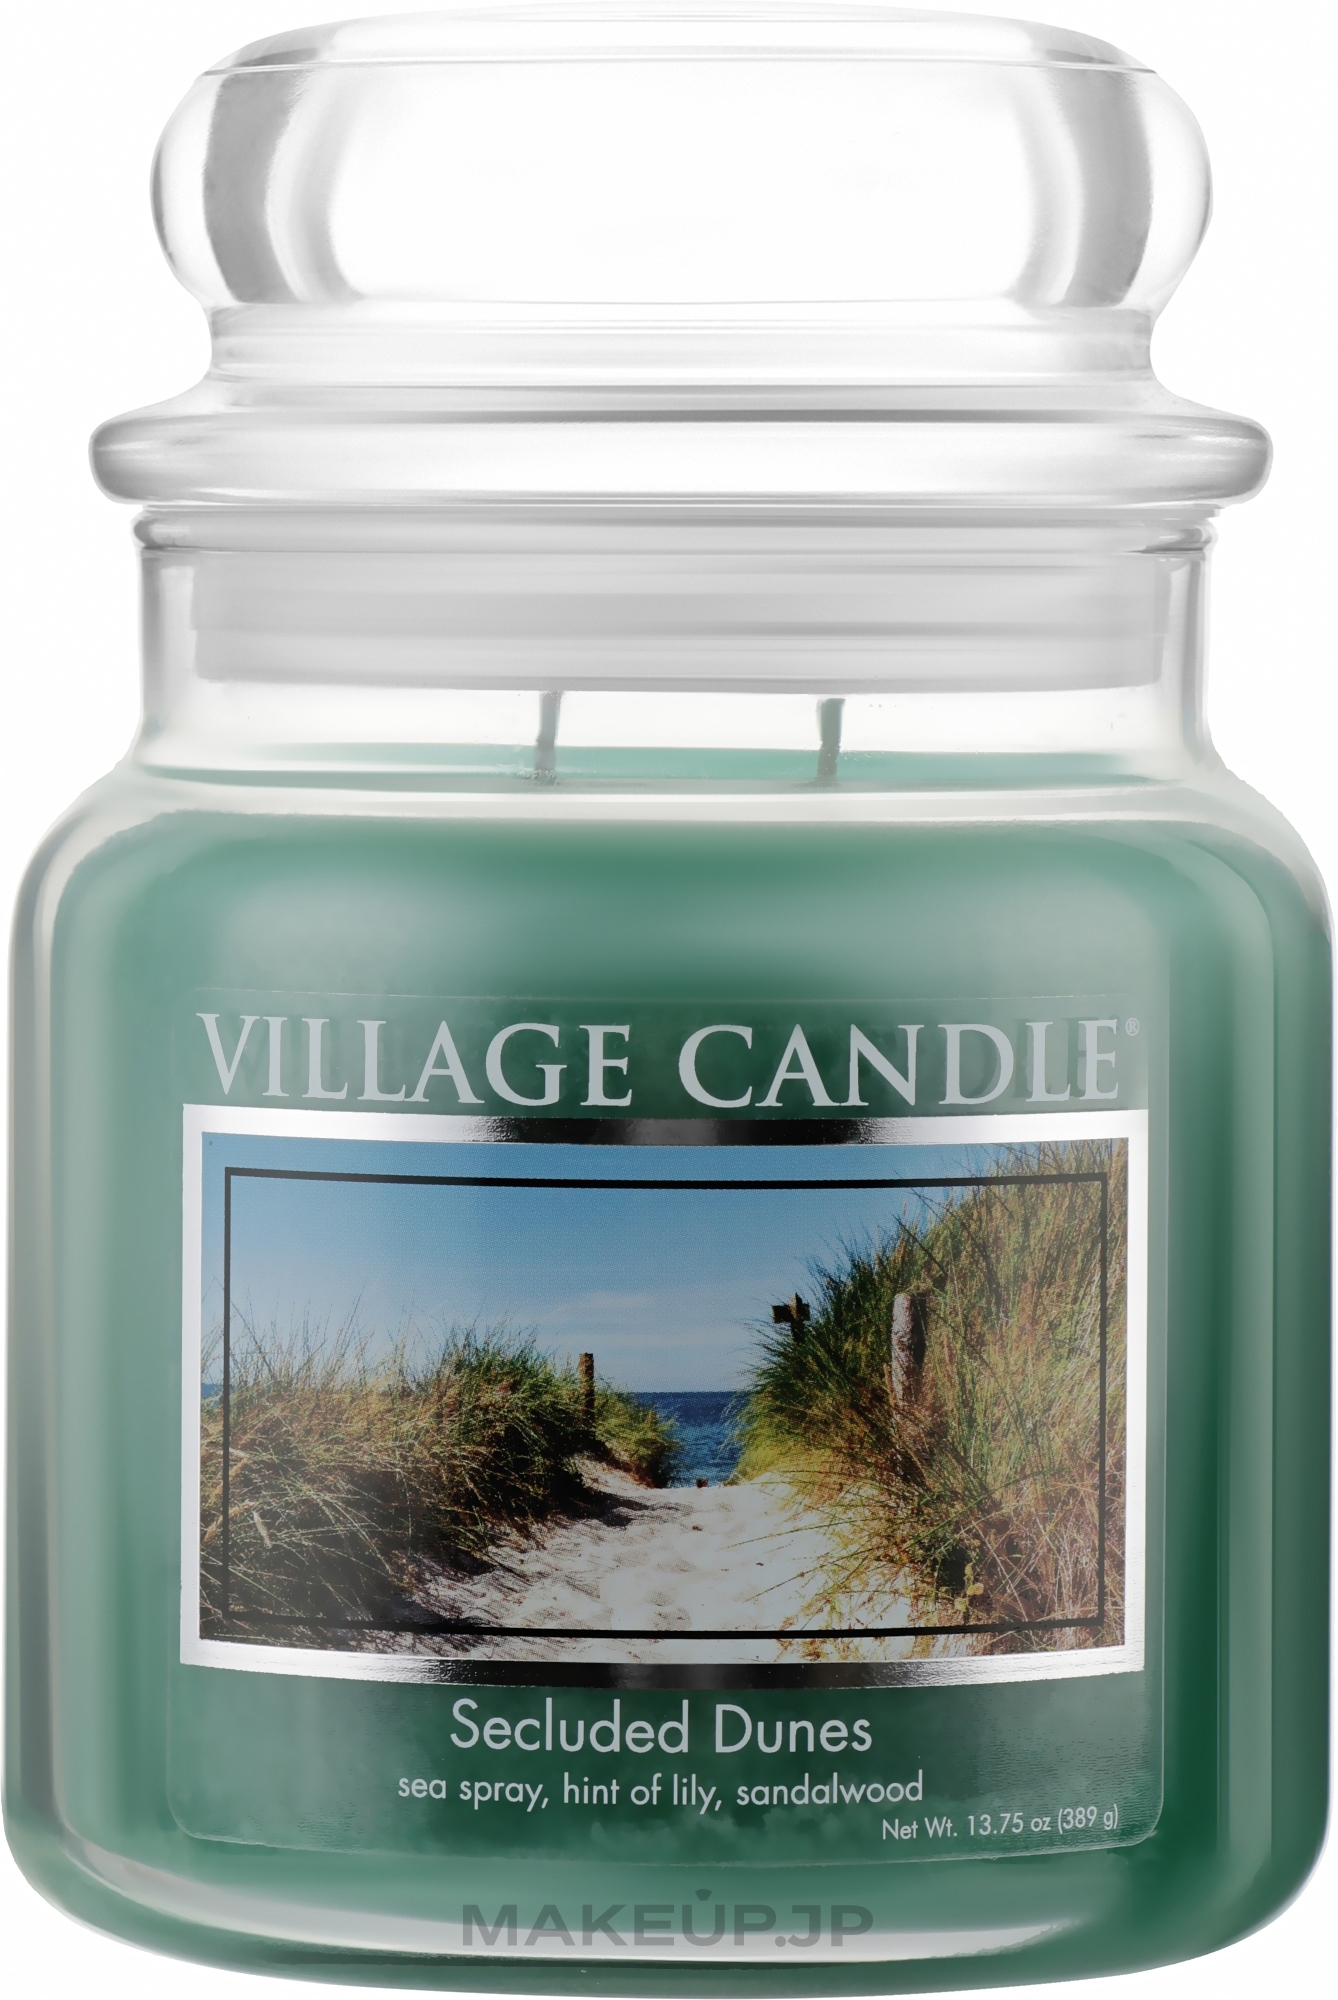 Scented Candle in Jar 'Secluded Dunes' - Village Candle Secluded Dunes — photo 389 g